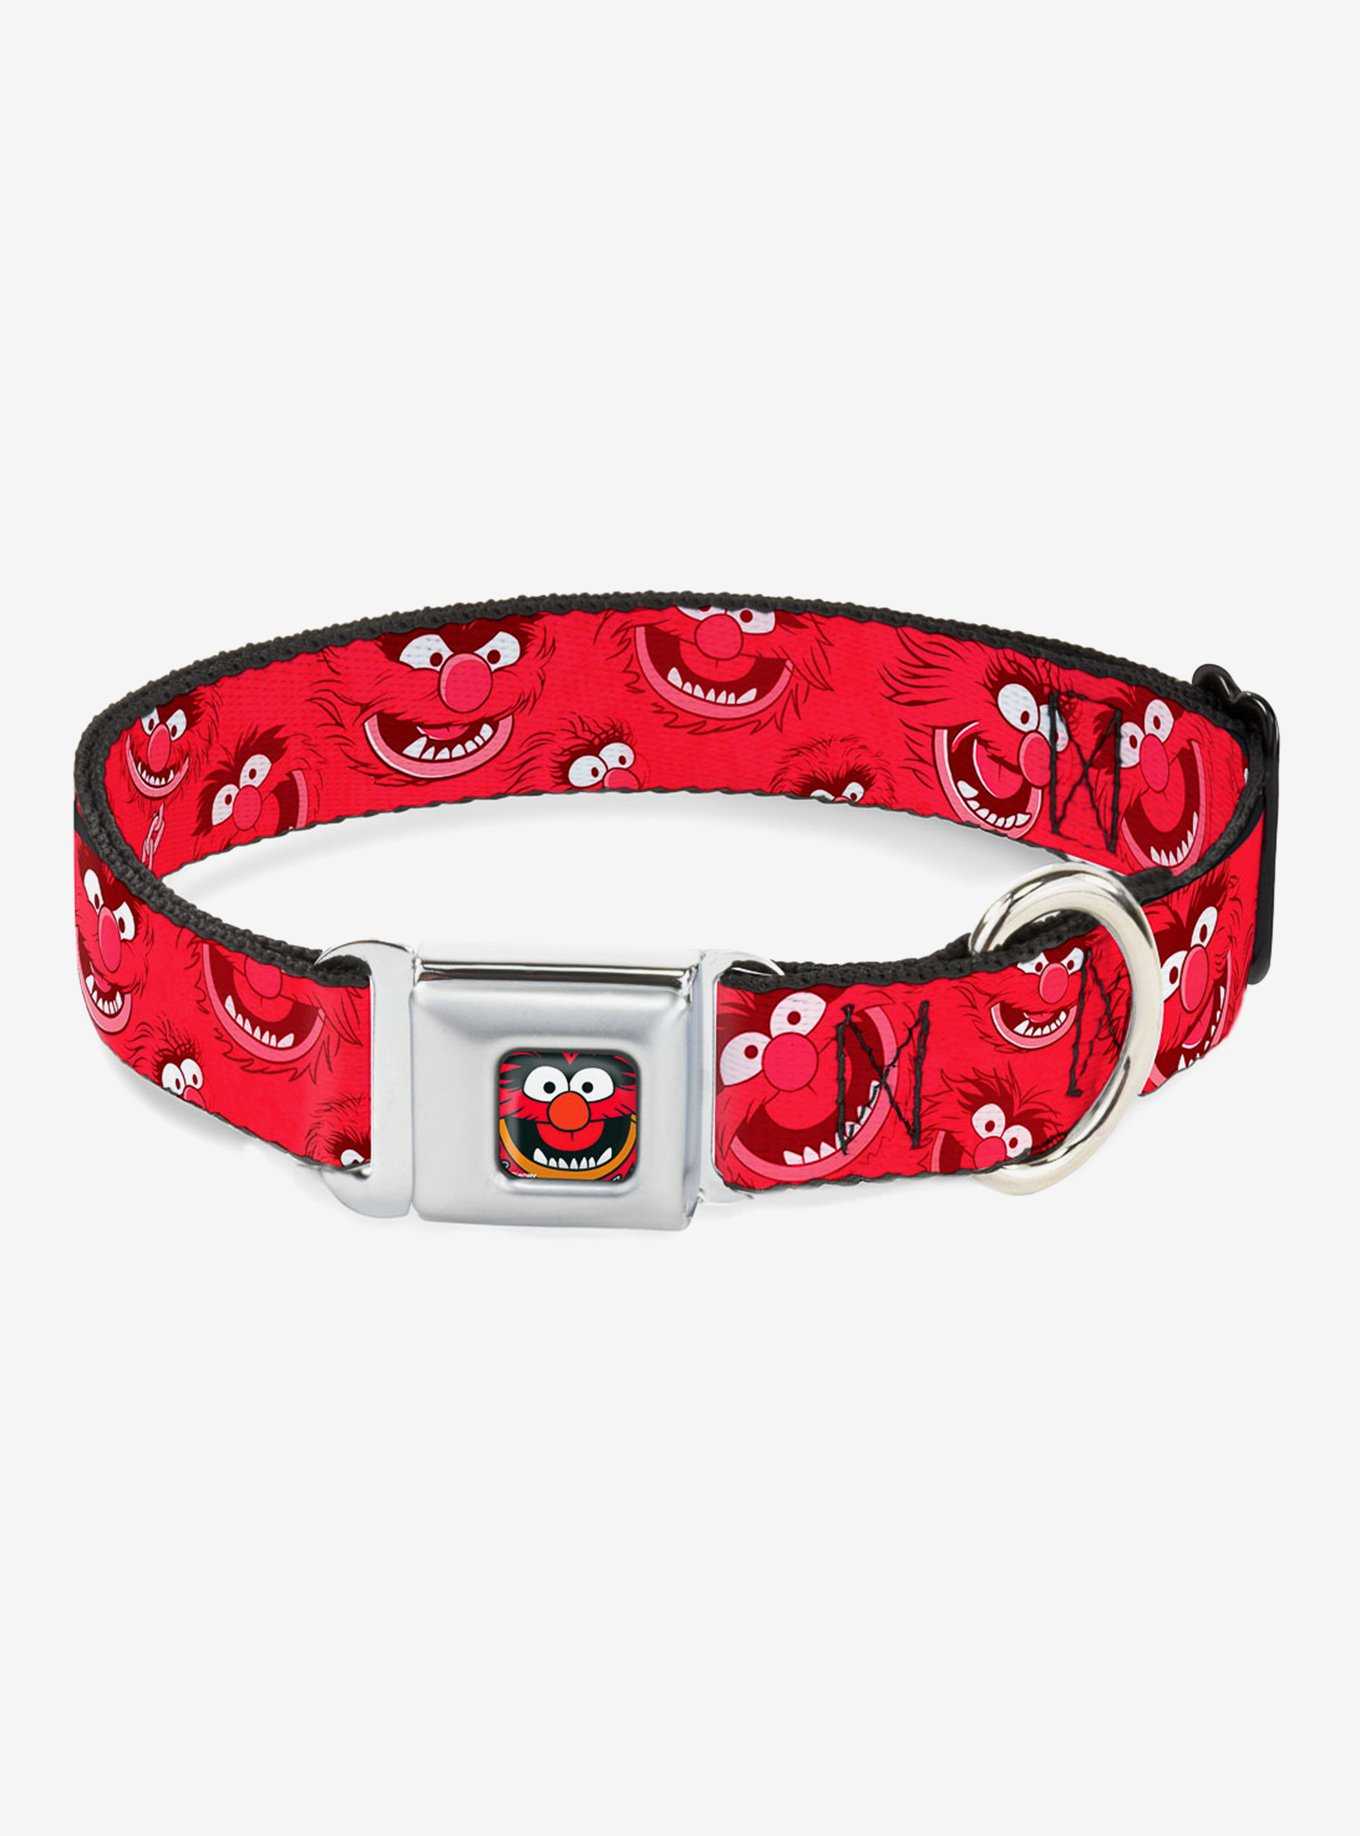 Disney The Muppets Animal Expressions Seatbelt Buckle Dog Collar, , hi-res